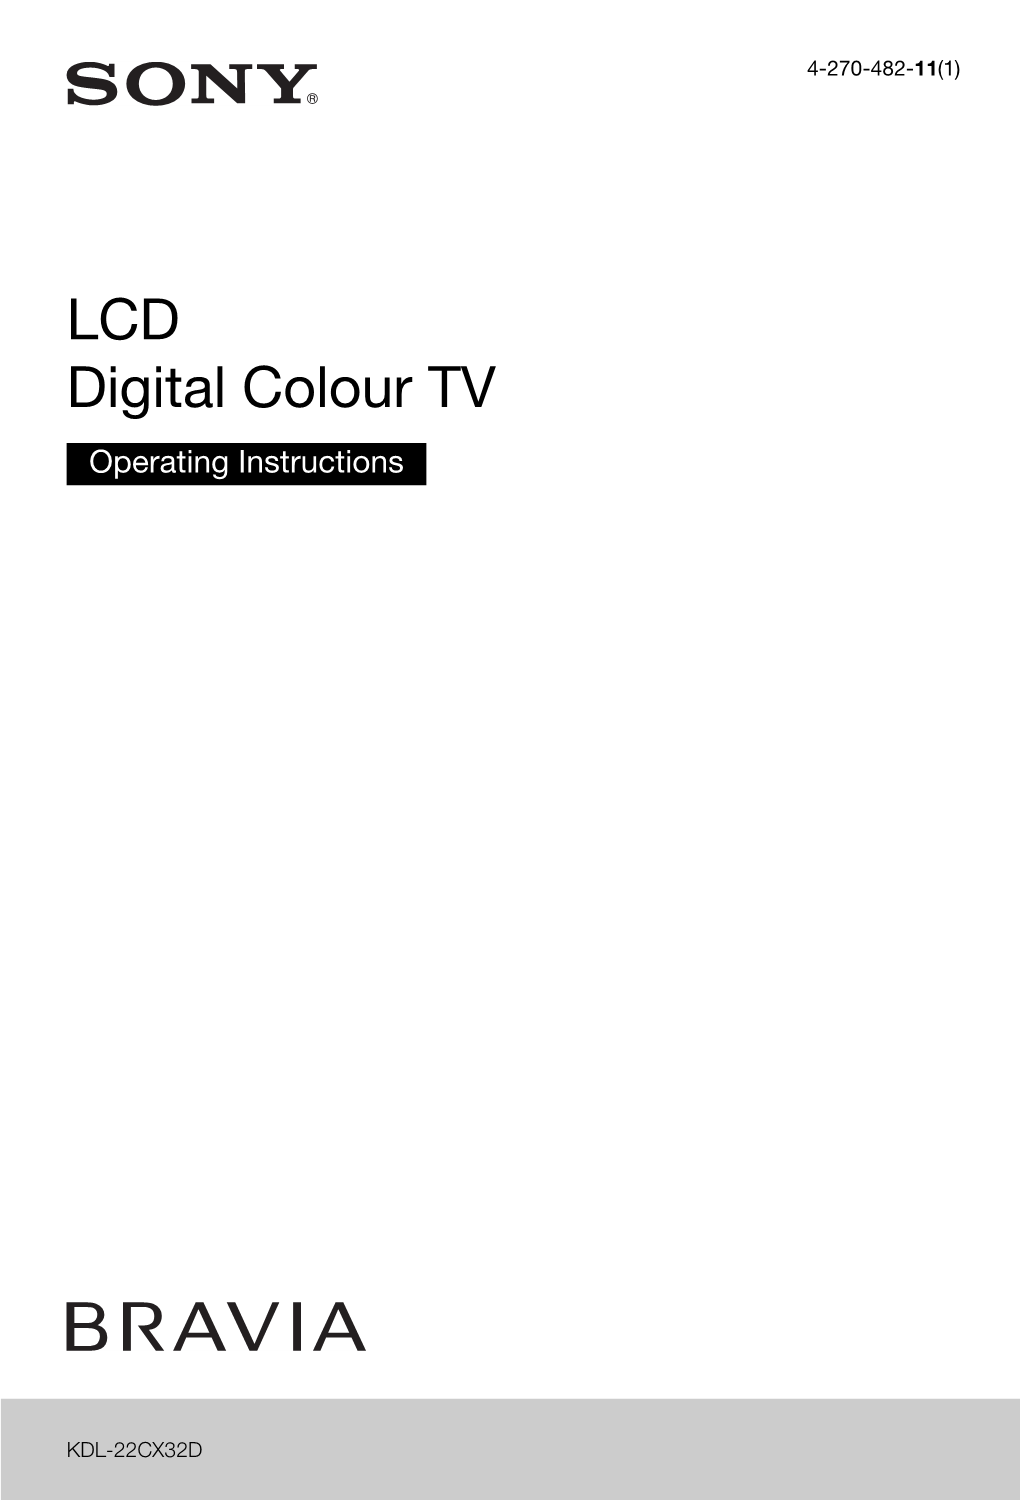 LCD Digital Colour TV Operating Instructions